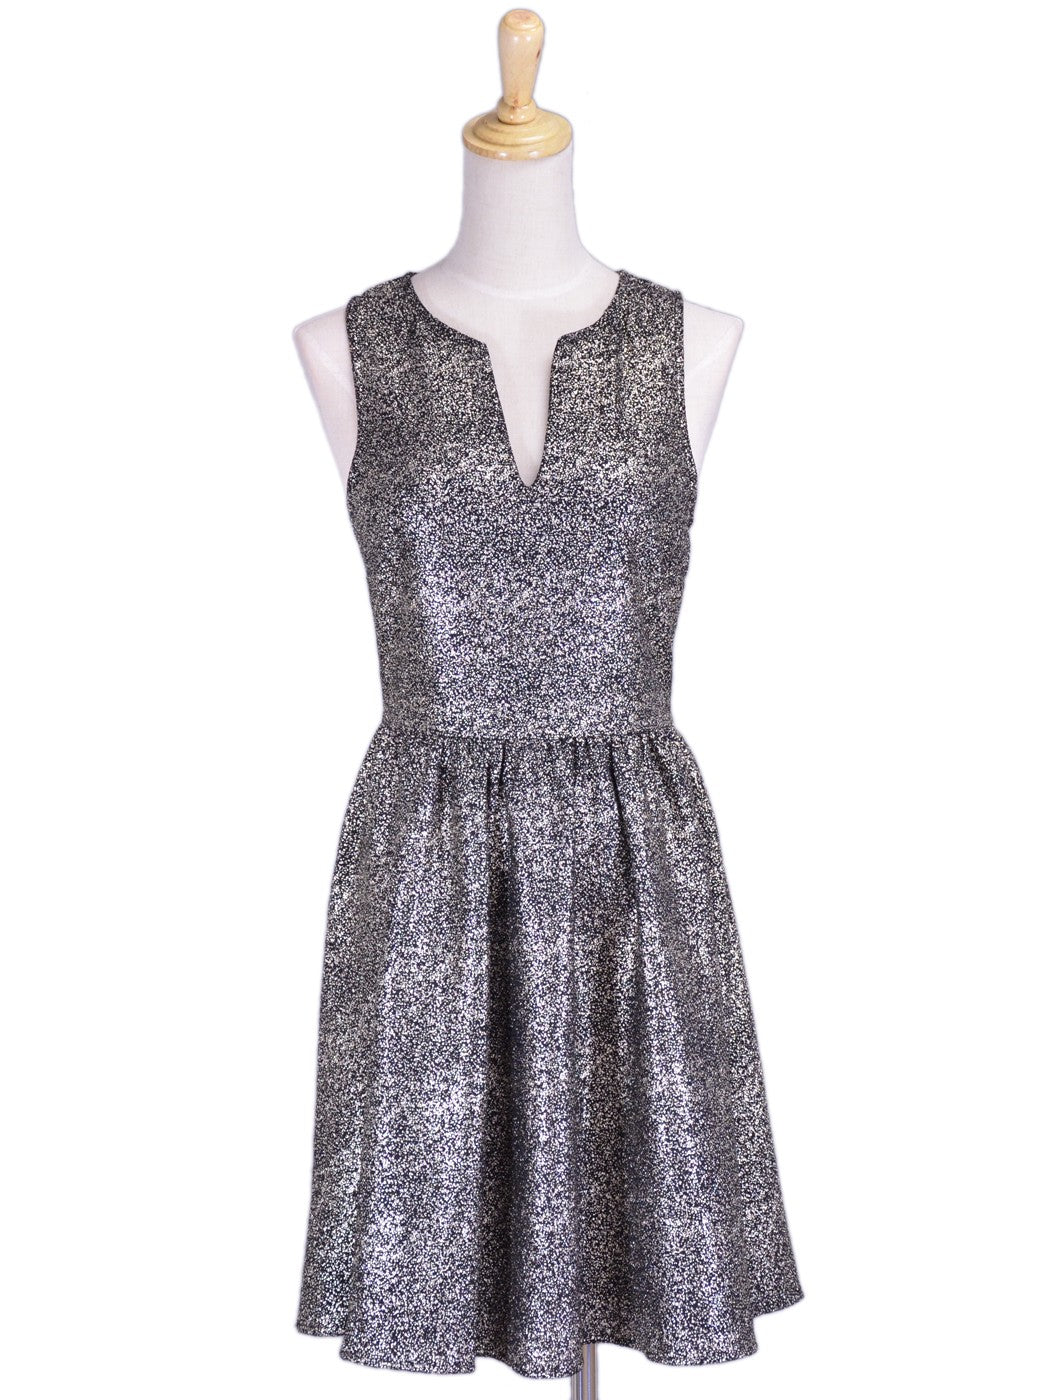 Everly Brand Gold Metallic Glitter Shimmer Cut Out Detail Holiday Party Dress